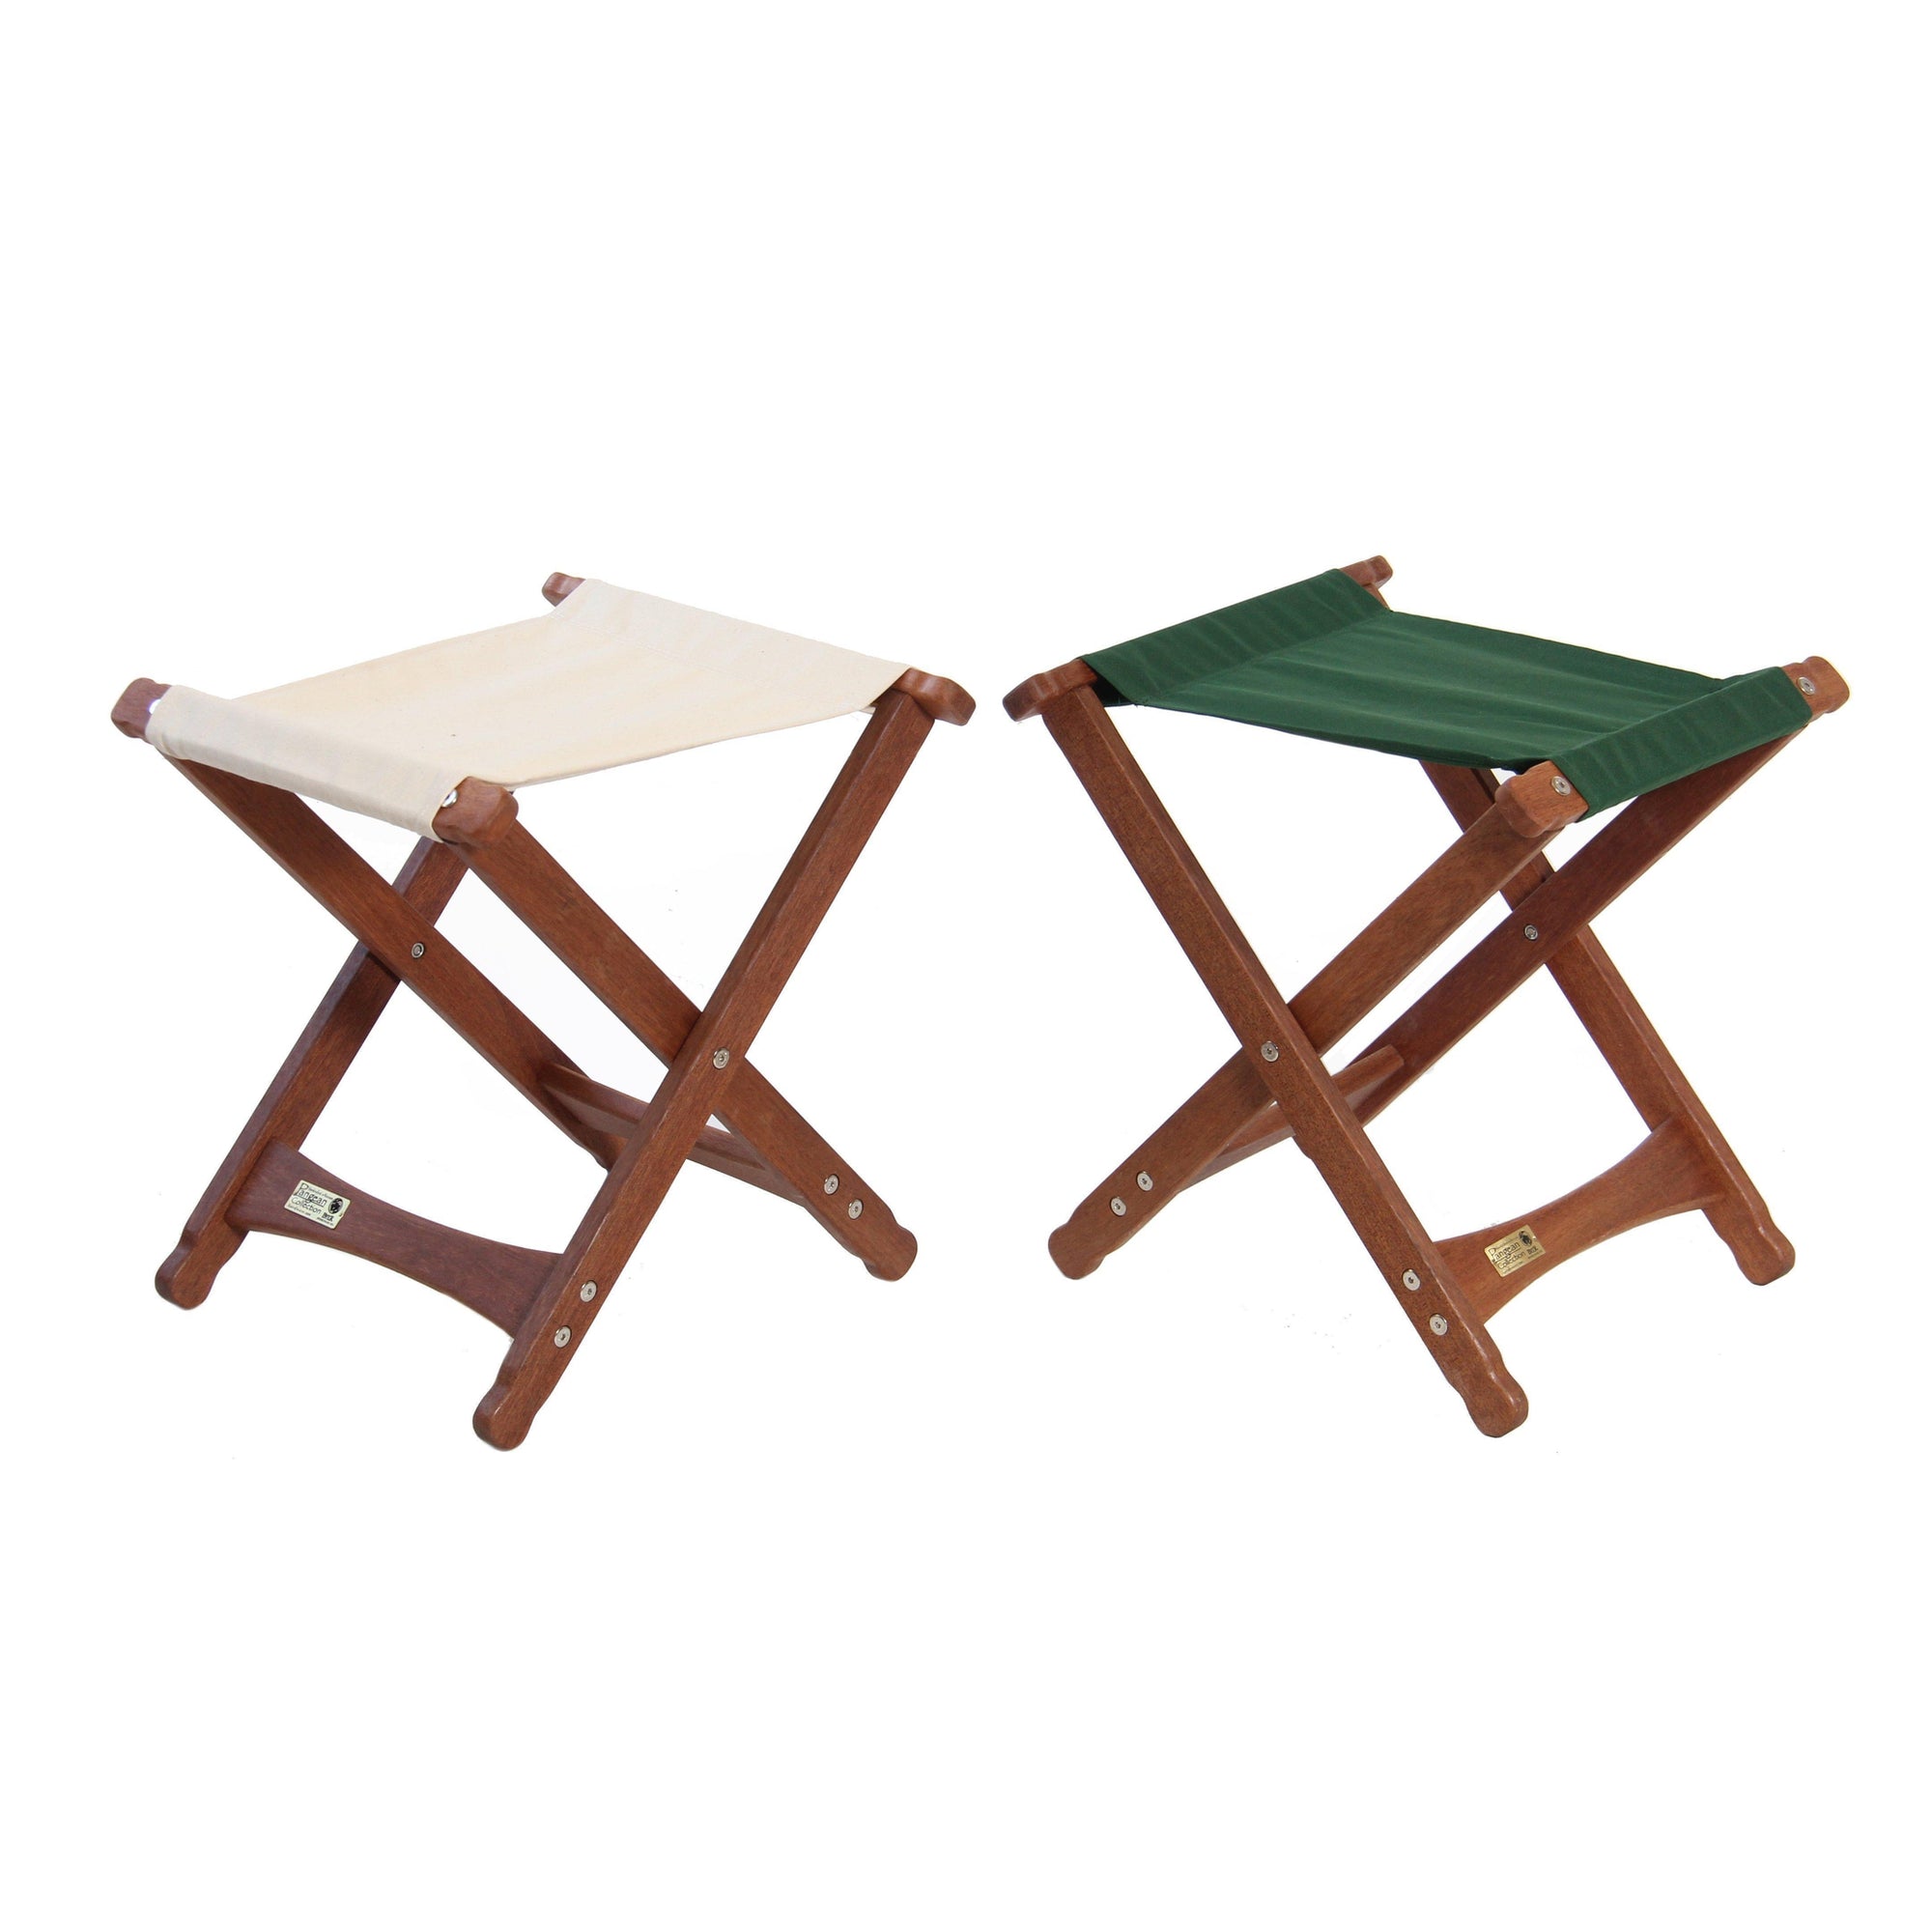 Pangean Folding Stool, from Byer of Maine